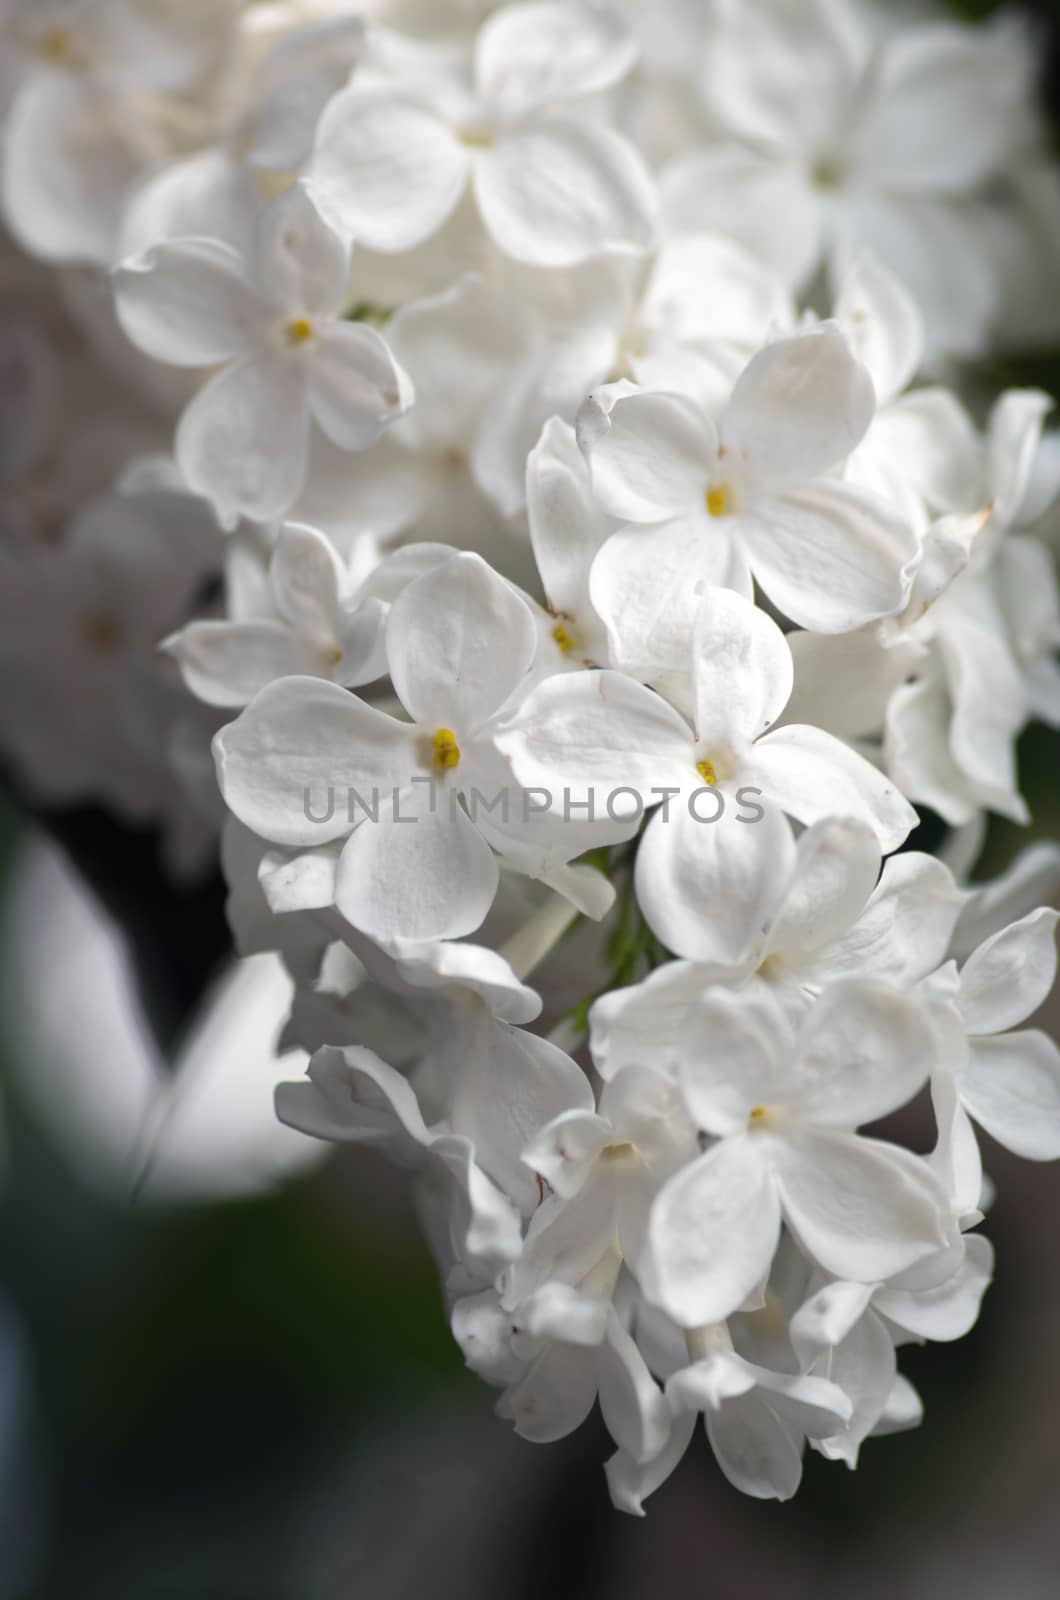 Blooming lilac flowers. Abstract background. Macro photo by dolnikow